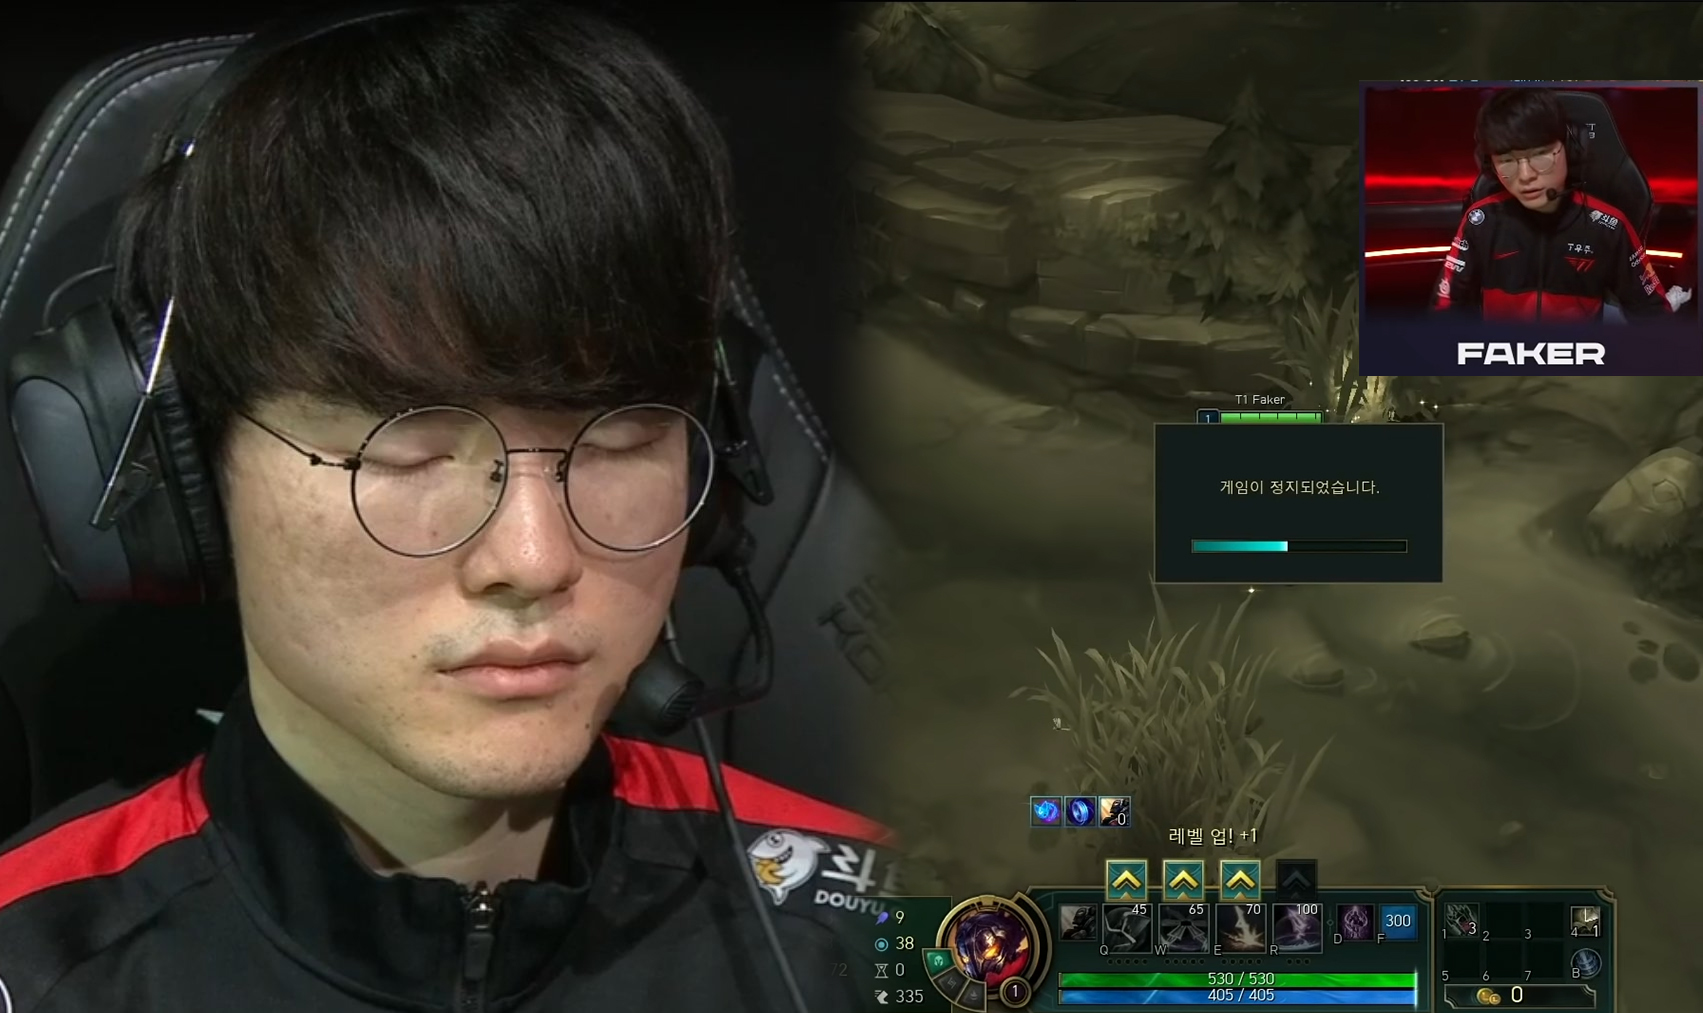 15 Interesting Facts about T1 Faker - Not A Gamer